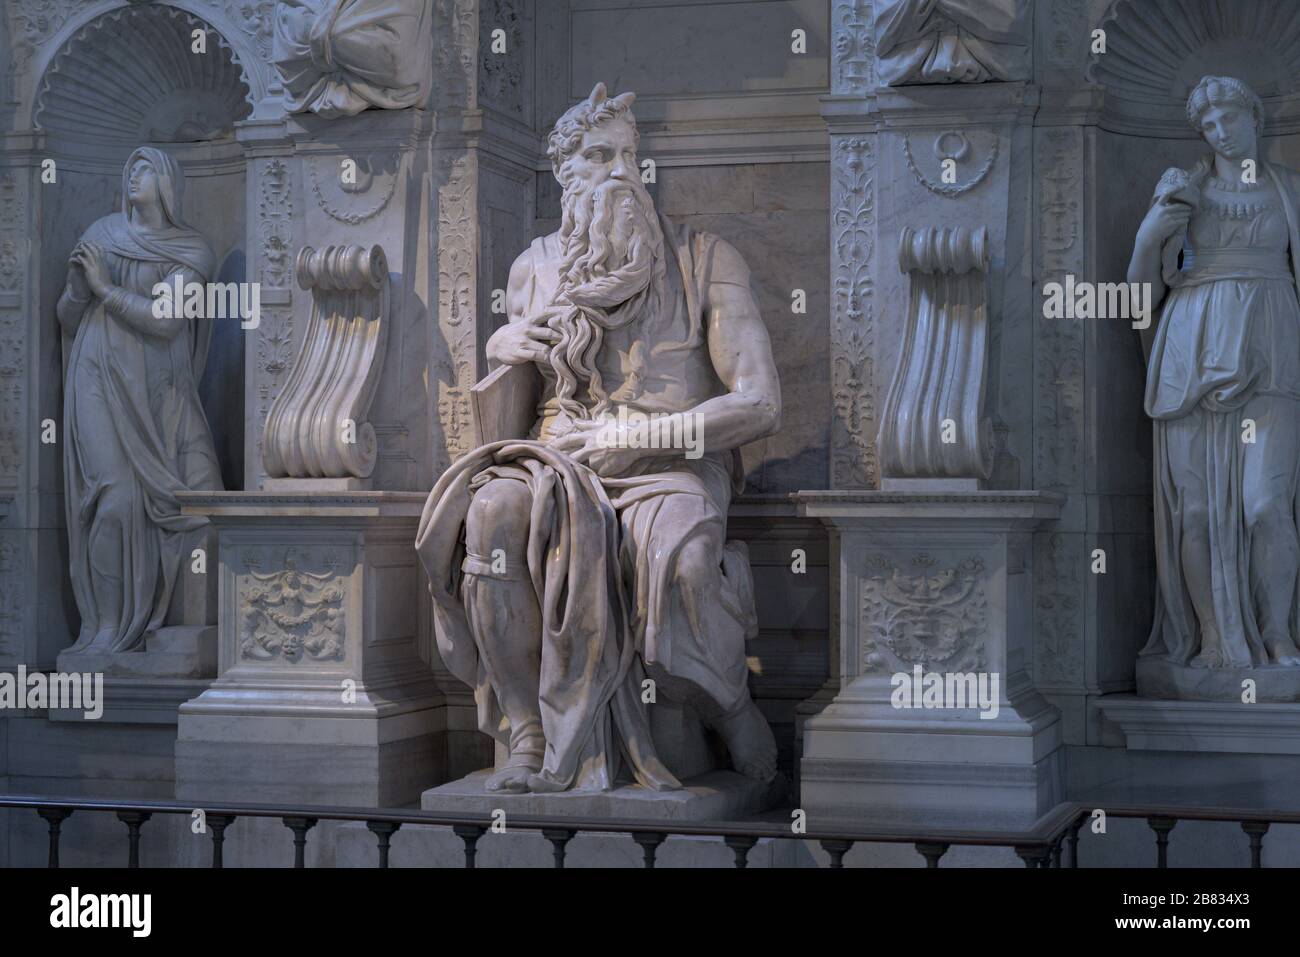 ROME, ITALY - 21 Jan 2020: Detail of the altar sculpture group of prophet Moses, famous sculpture by Renaissance artist Michelangelo for the church of Stock Photo